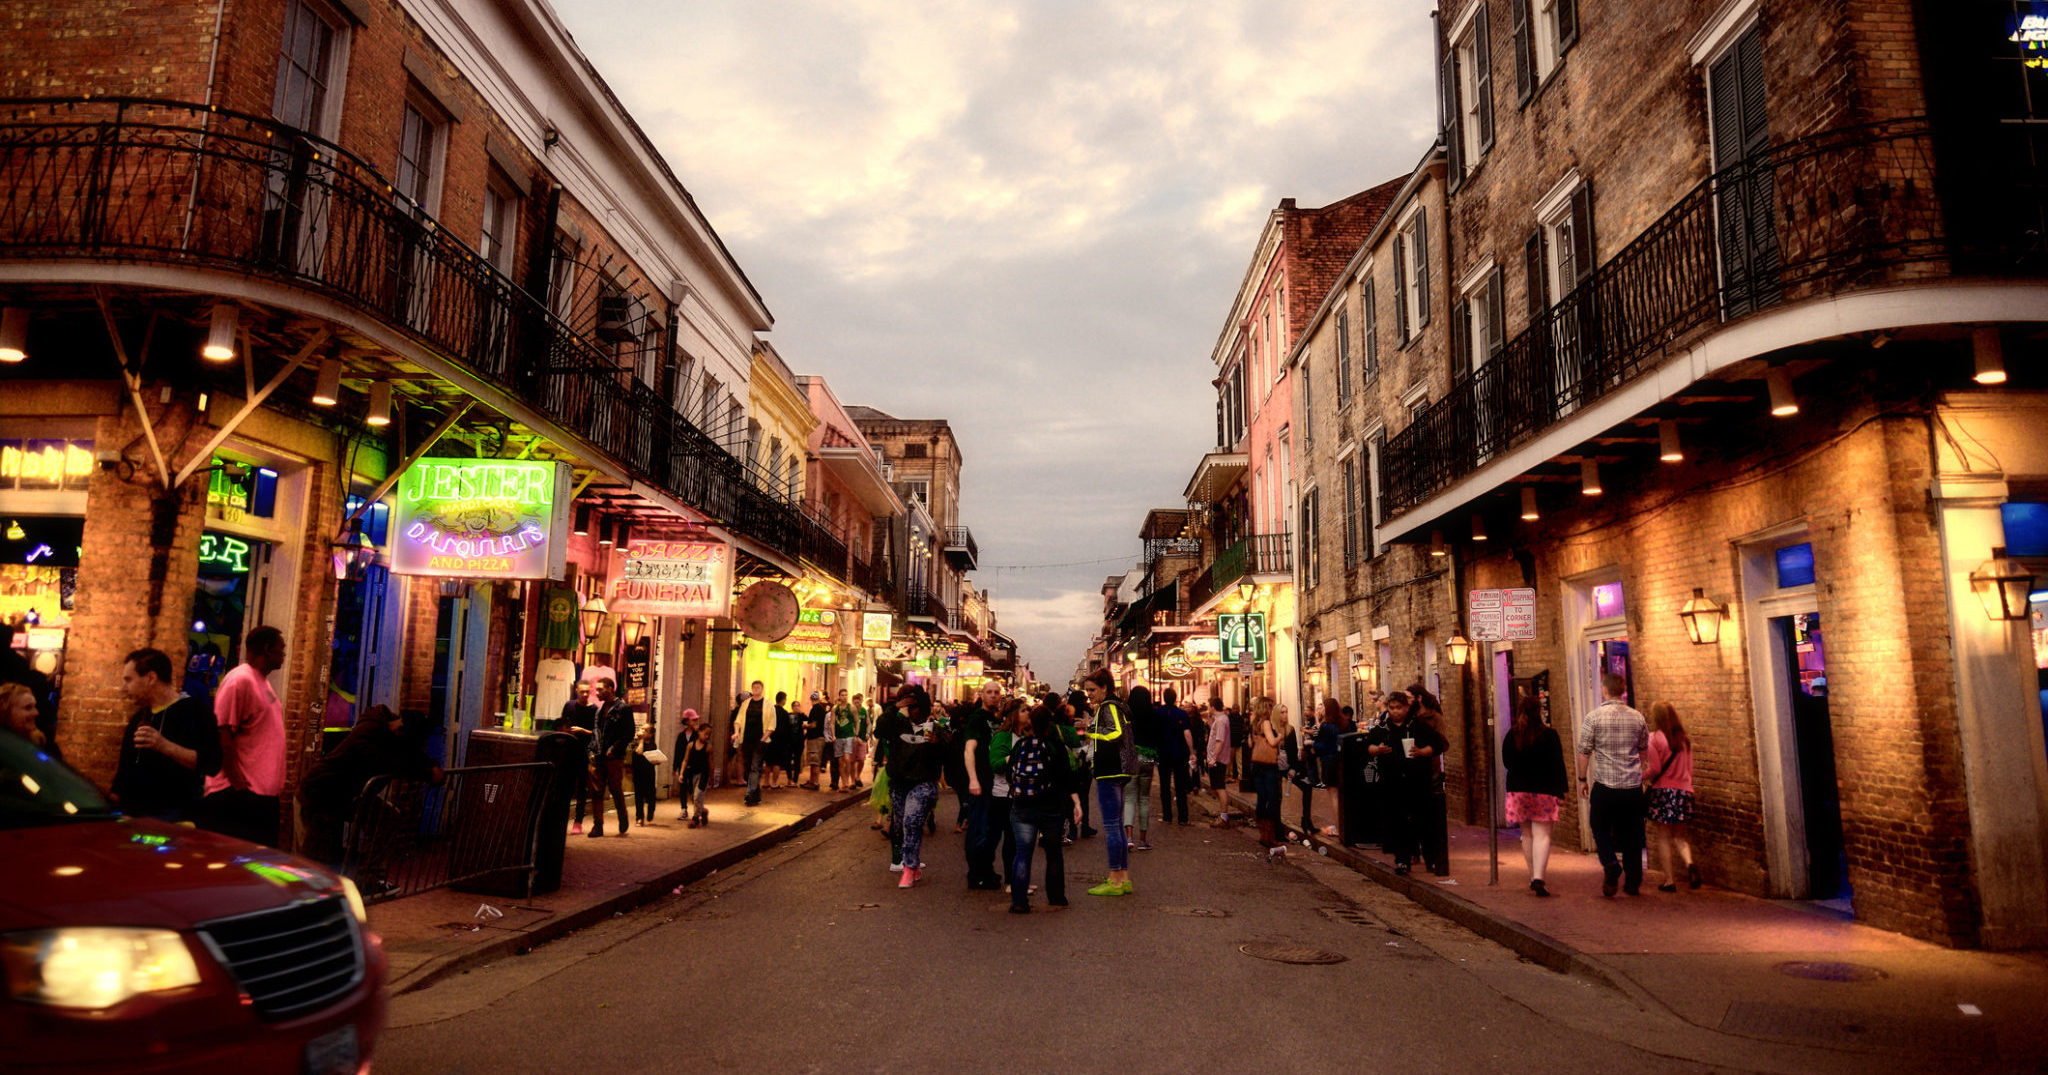 Things To Do In New Orleans In The Fall